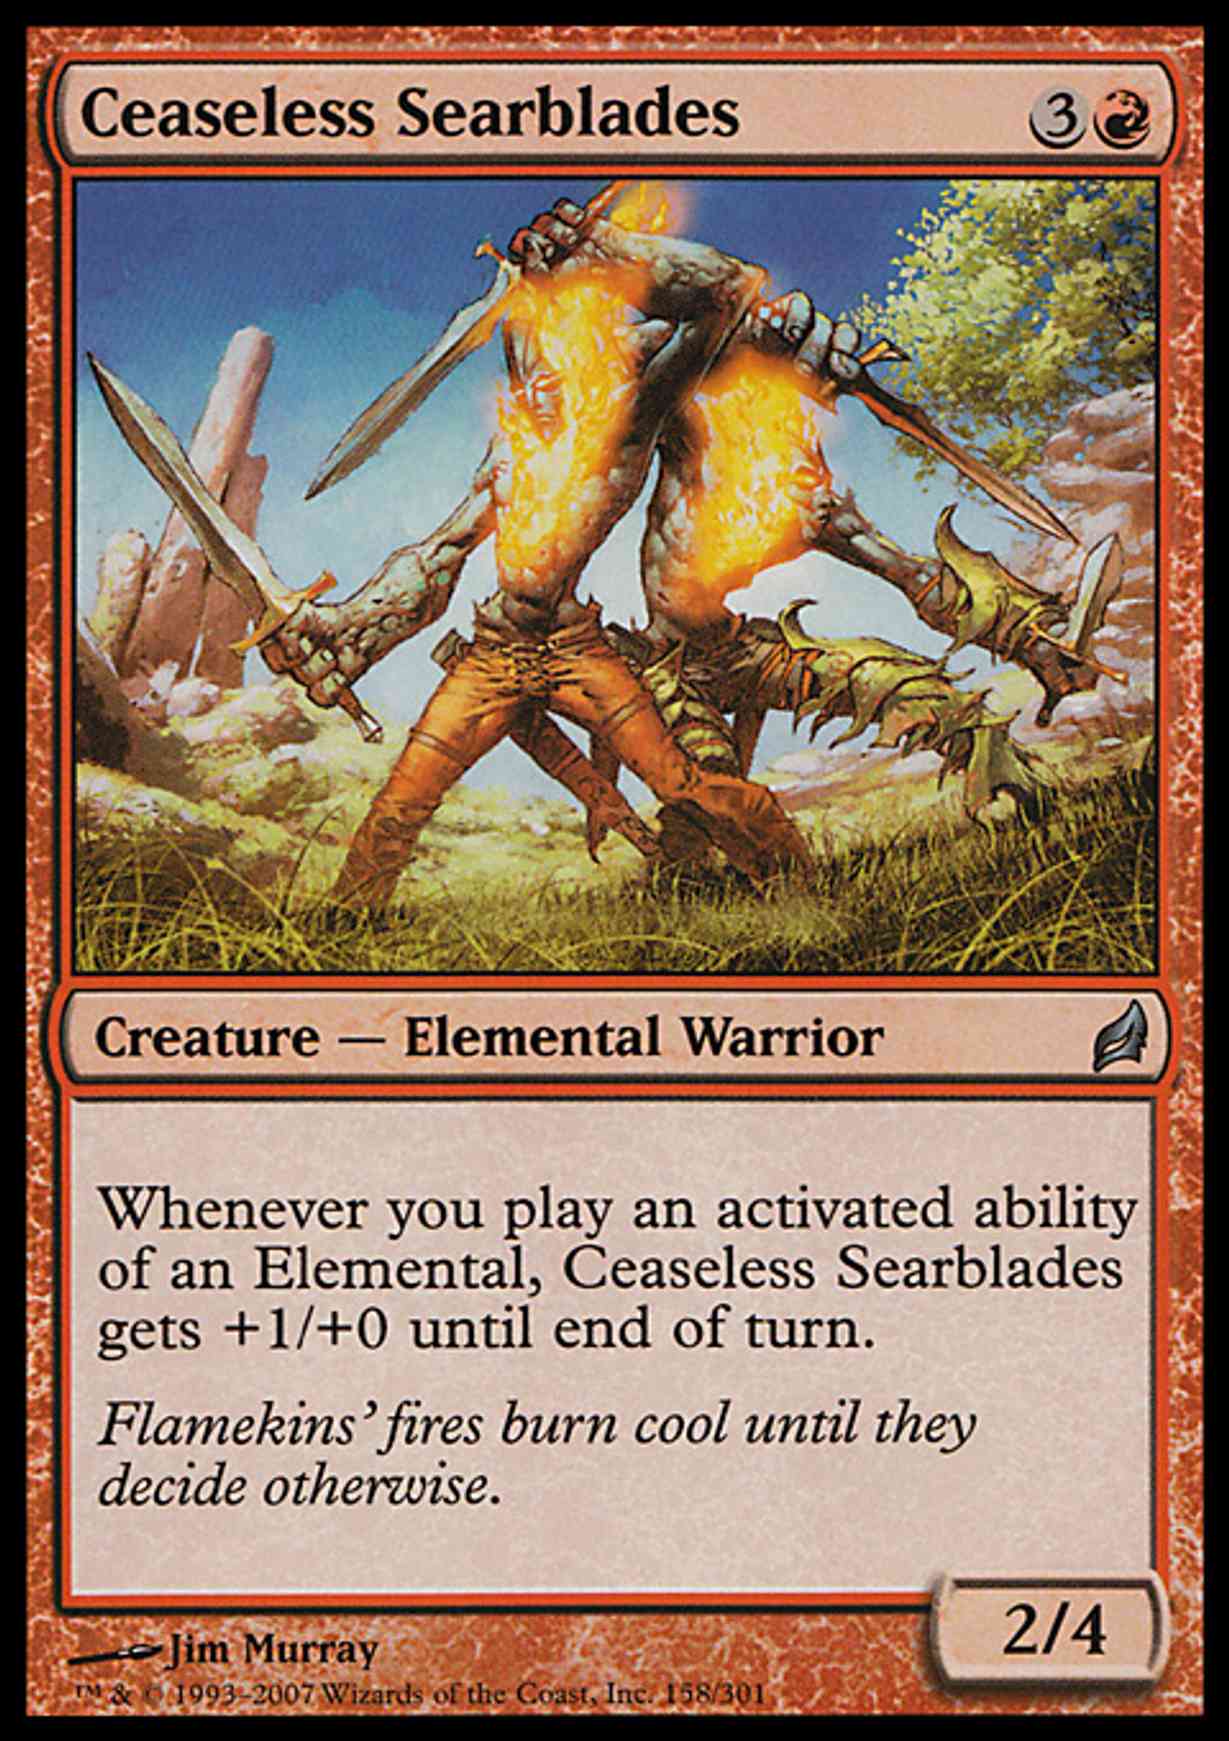 Ceaseless Searblades magic card front